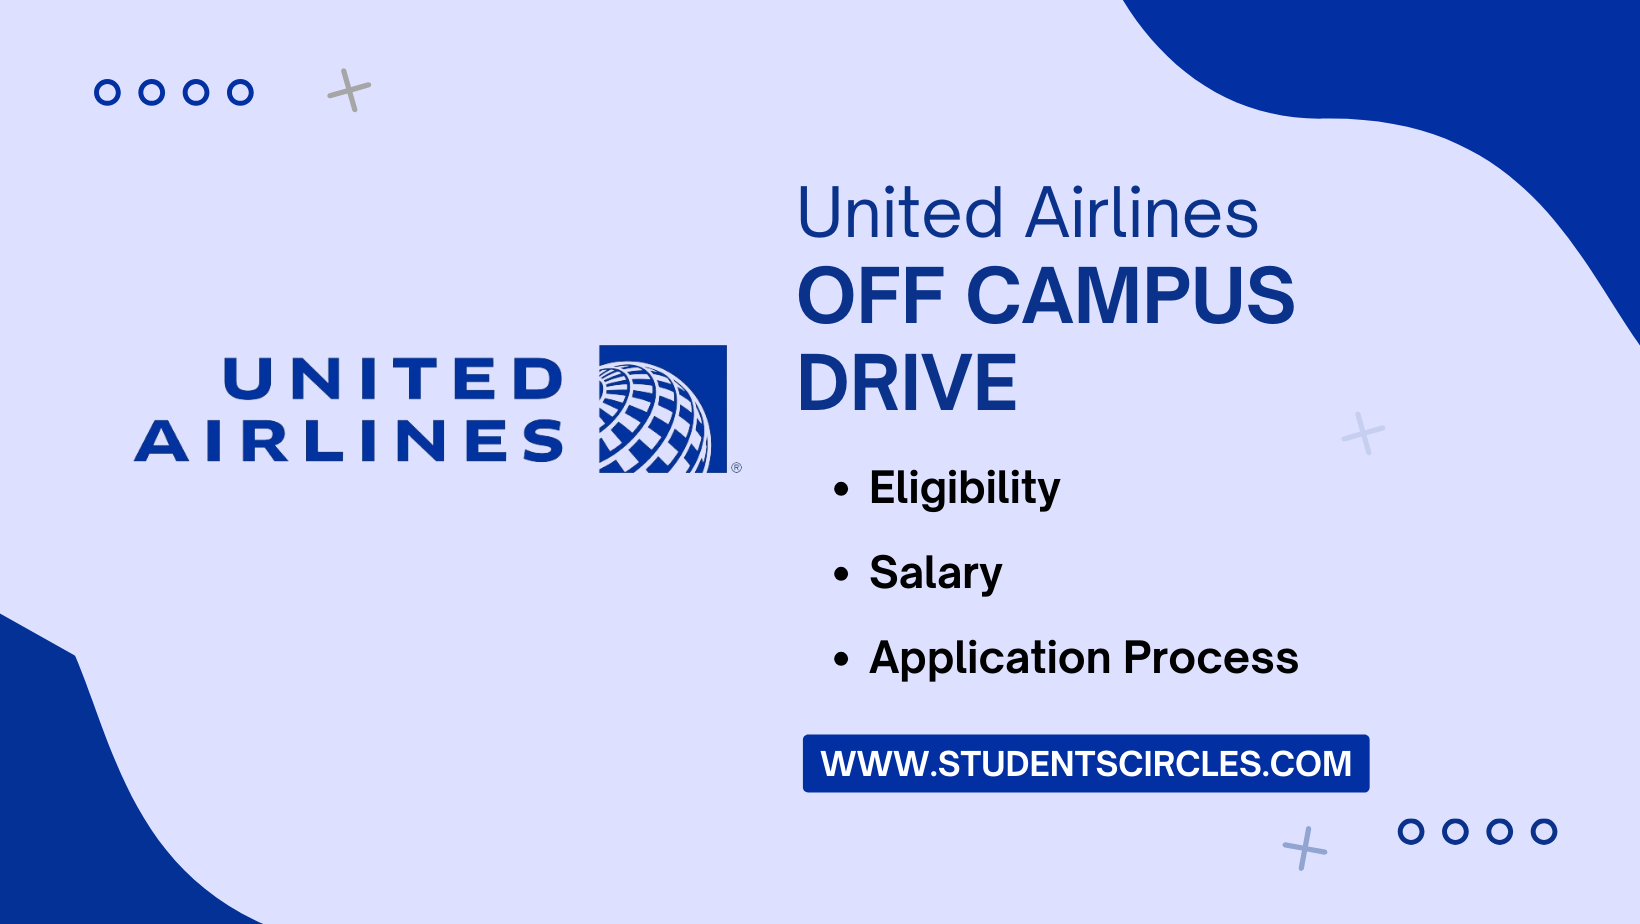 United Airlines Off Campus Drive